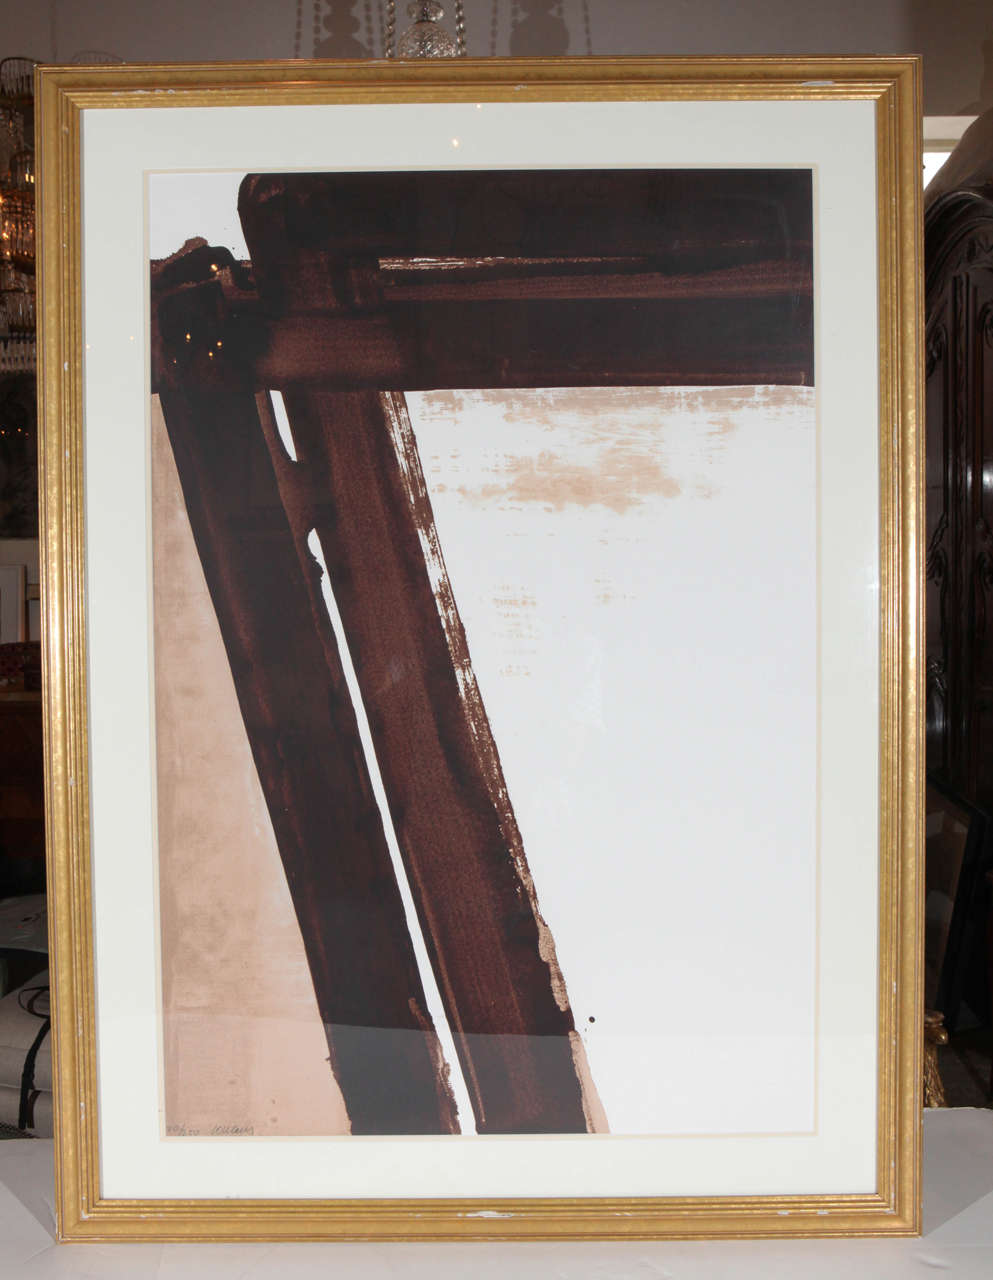 Signed and numbered, abstract lithograph by renowned French artist, Pierre Soulages.